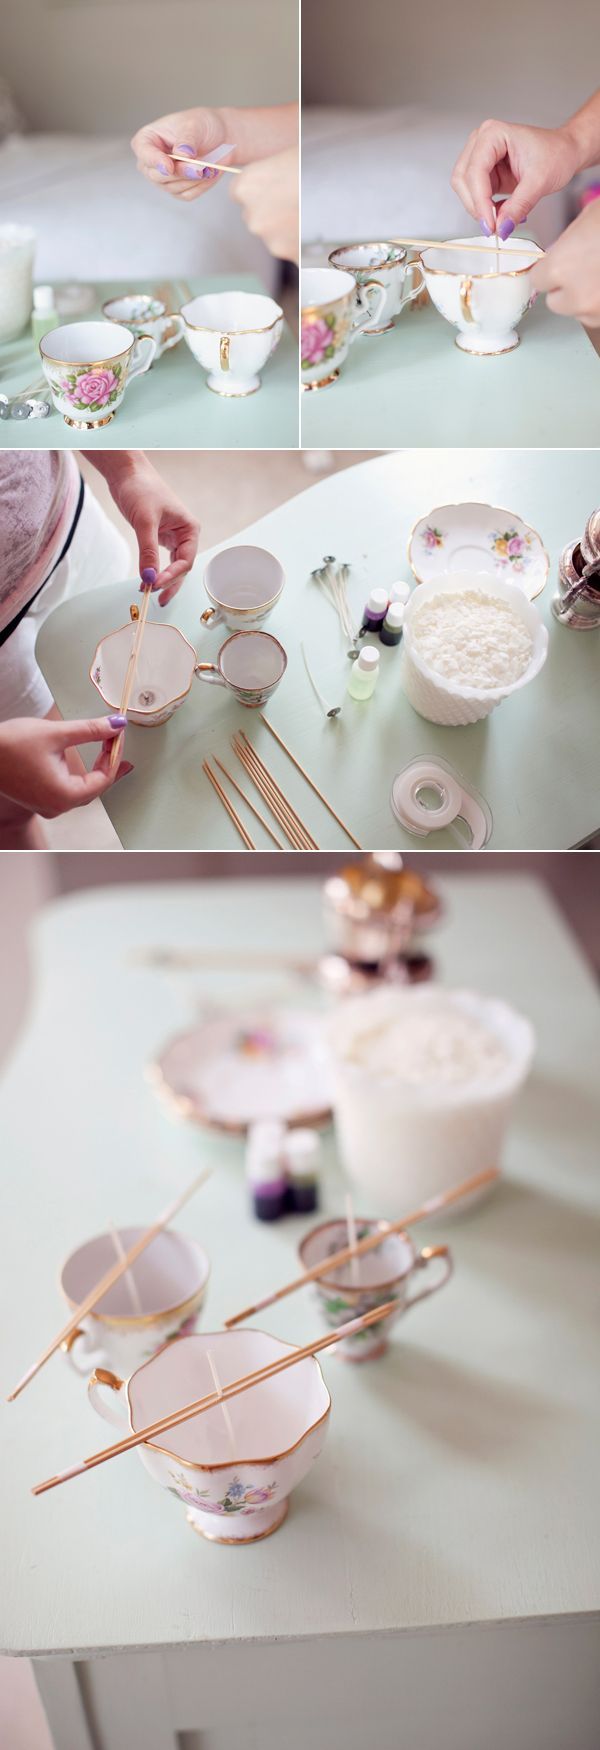 #DIY Vintage Teacup Candles – VERY easy and would be a cute gift/party favor.